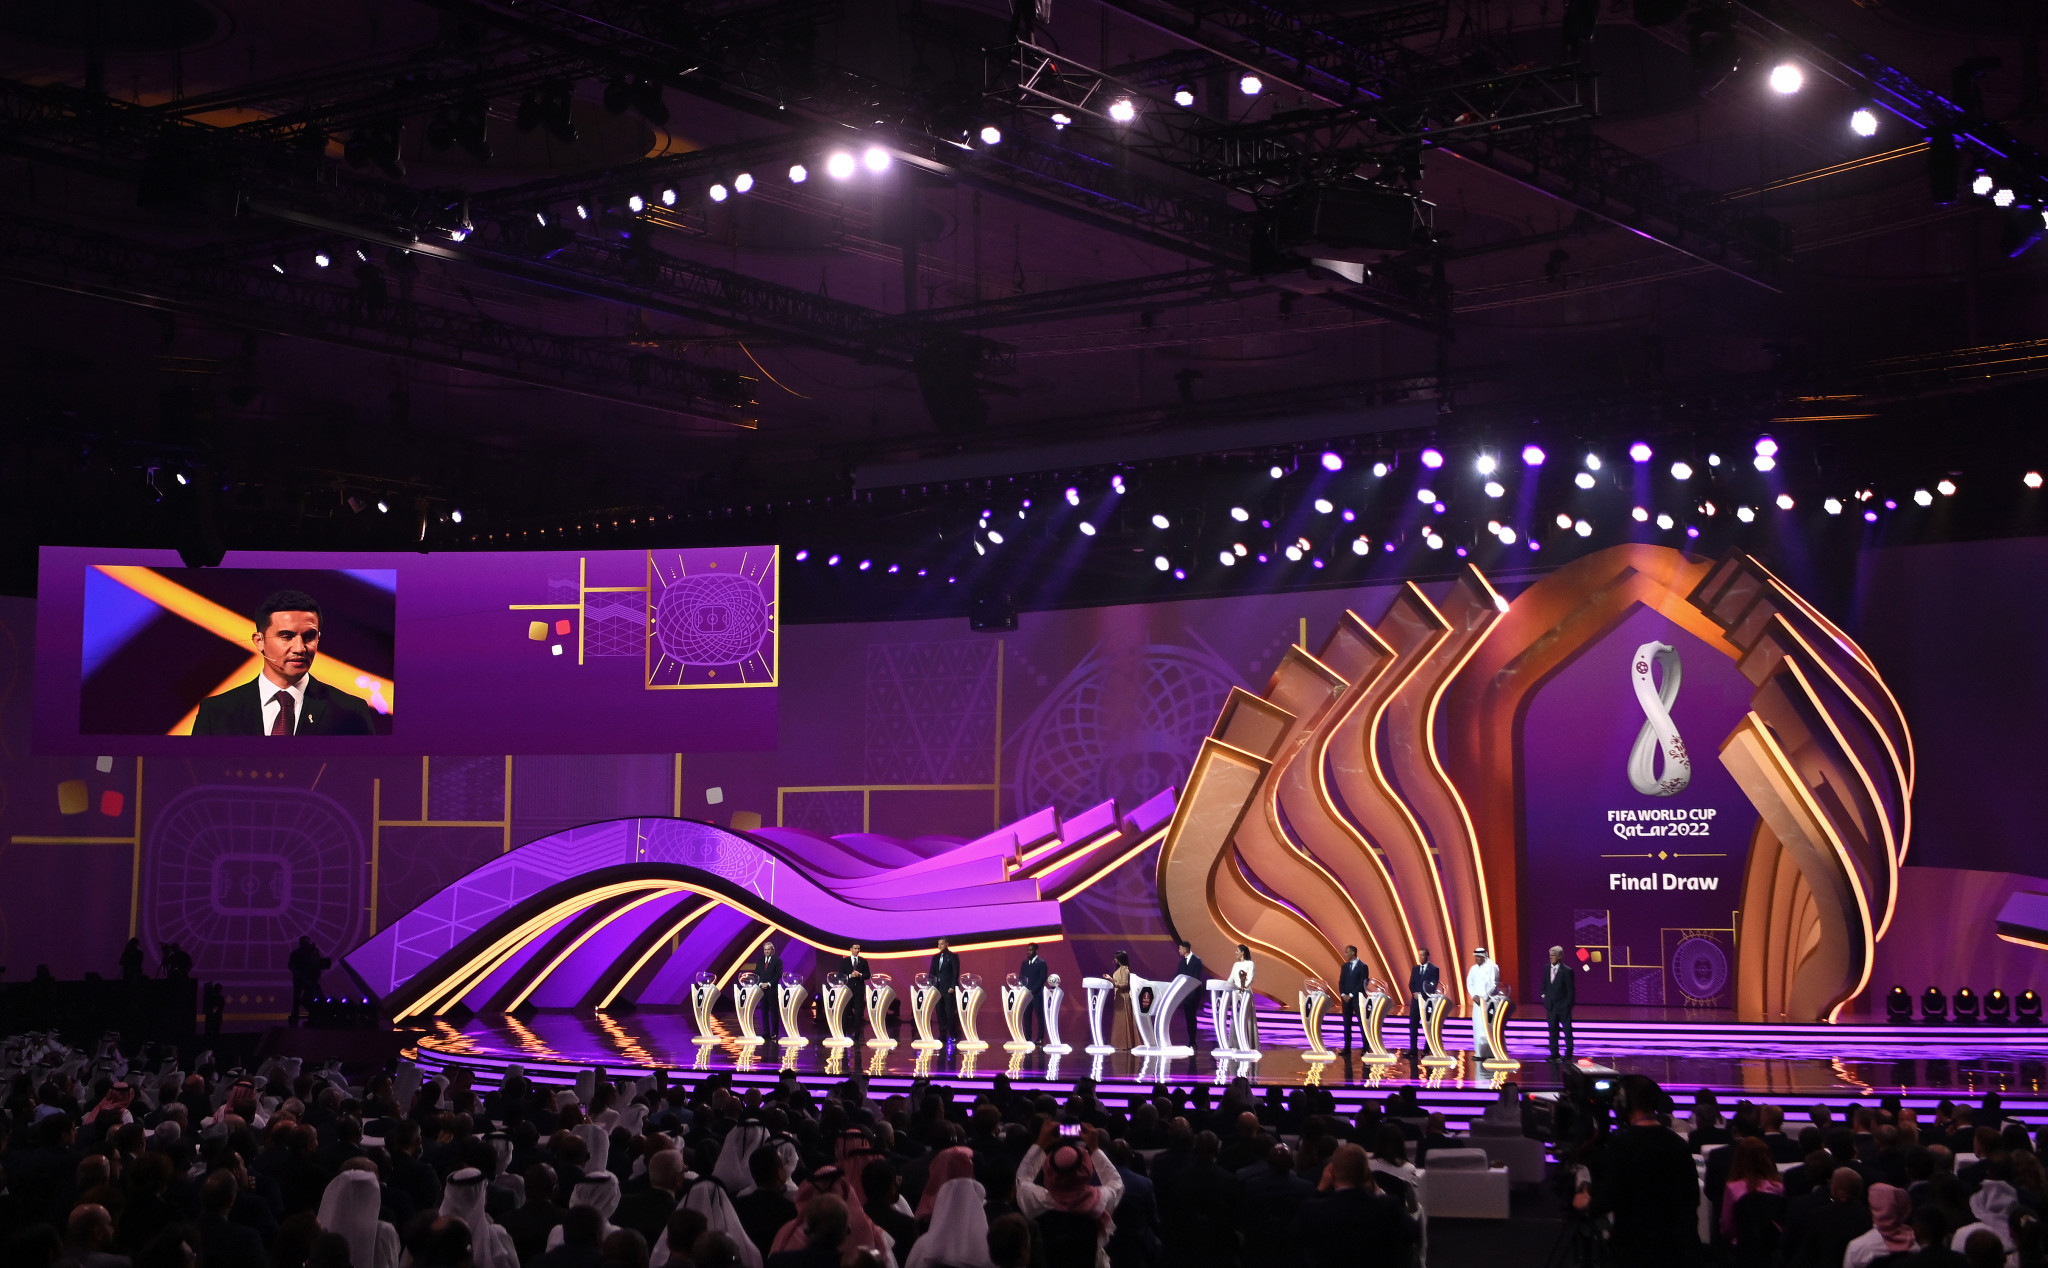 FIFA World Cup 2022 comes one step closer as draw takes place in Qatar